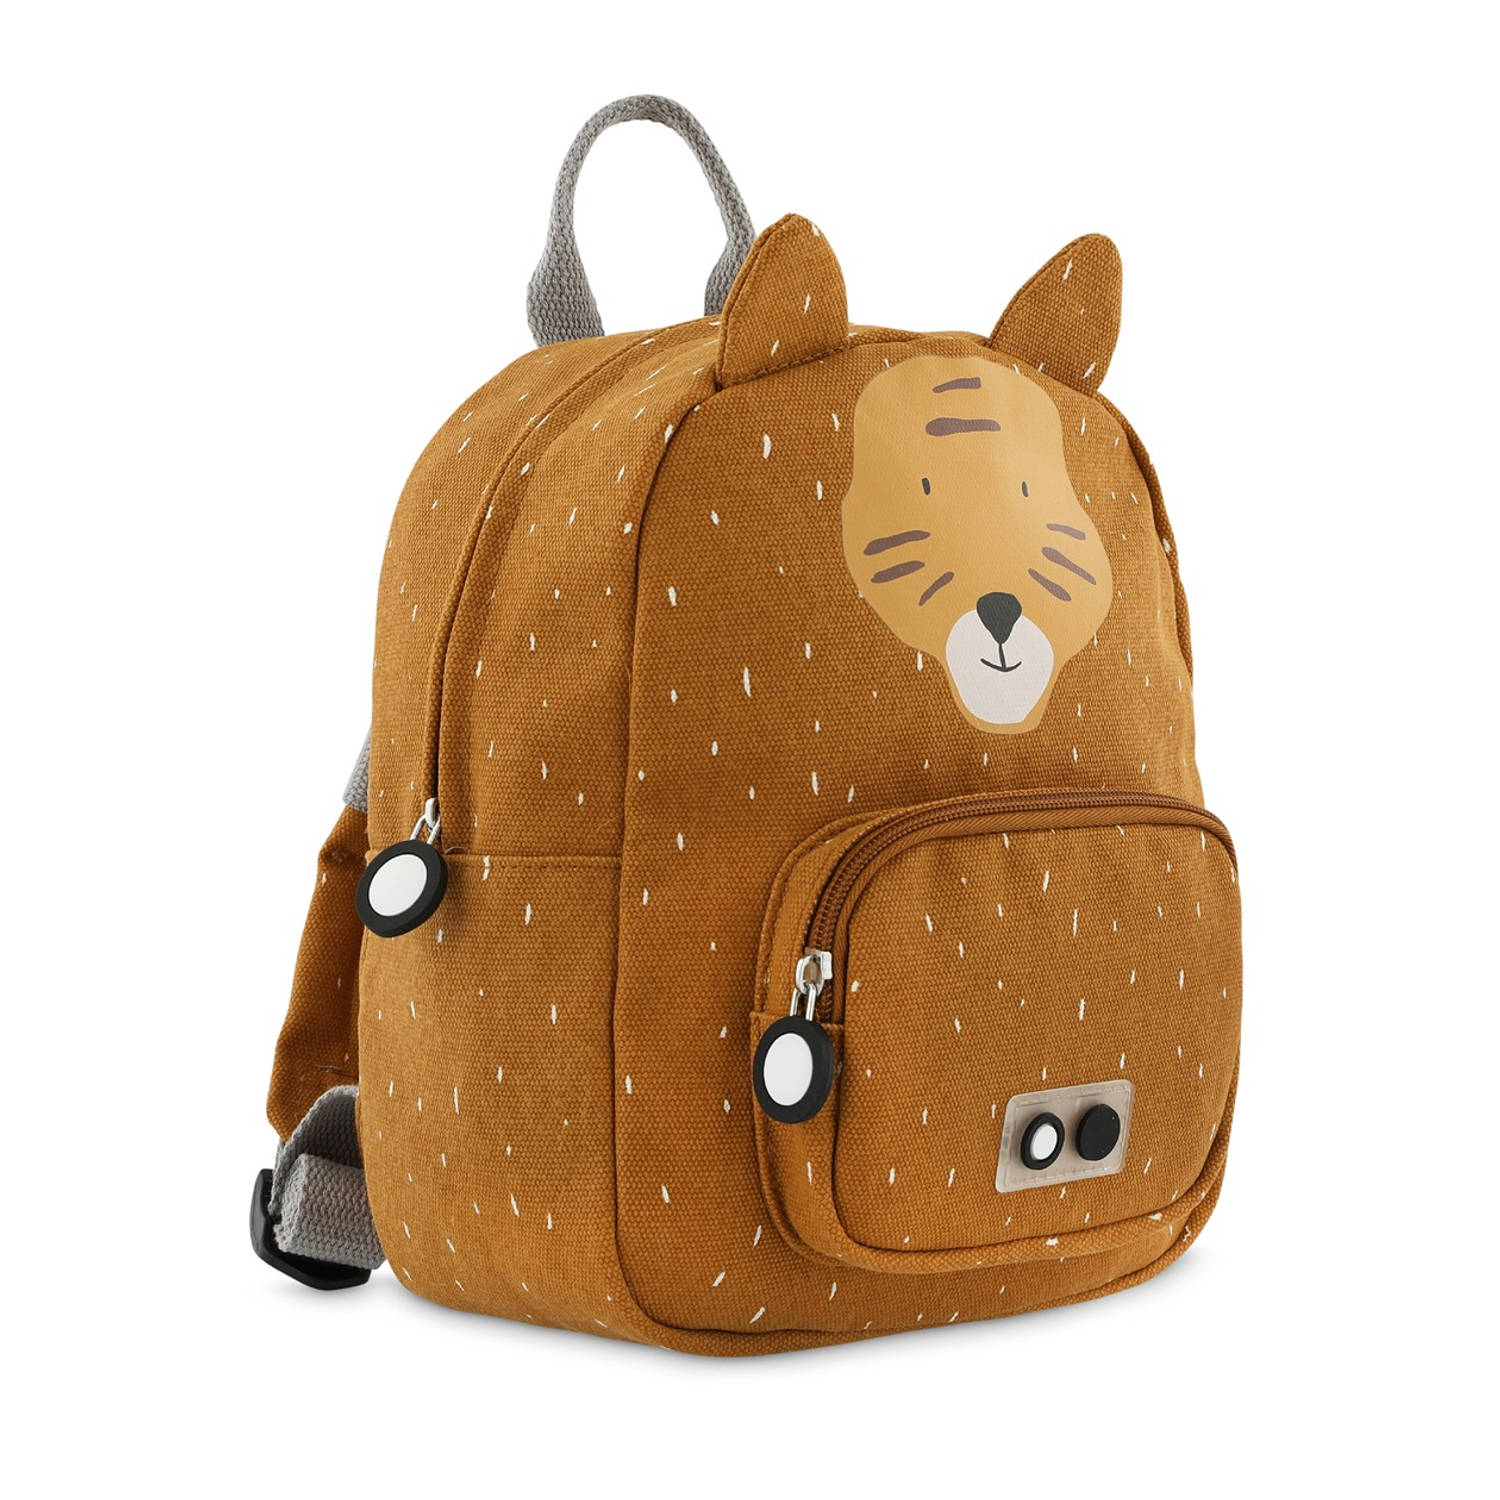 Trixie BACKPACK SMALL - MR. TIGER